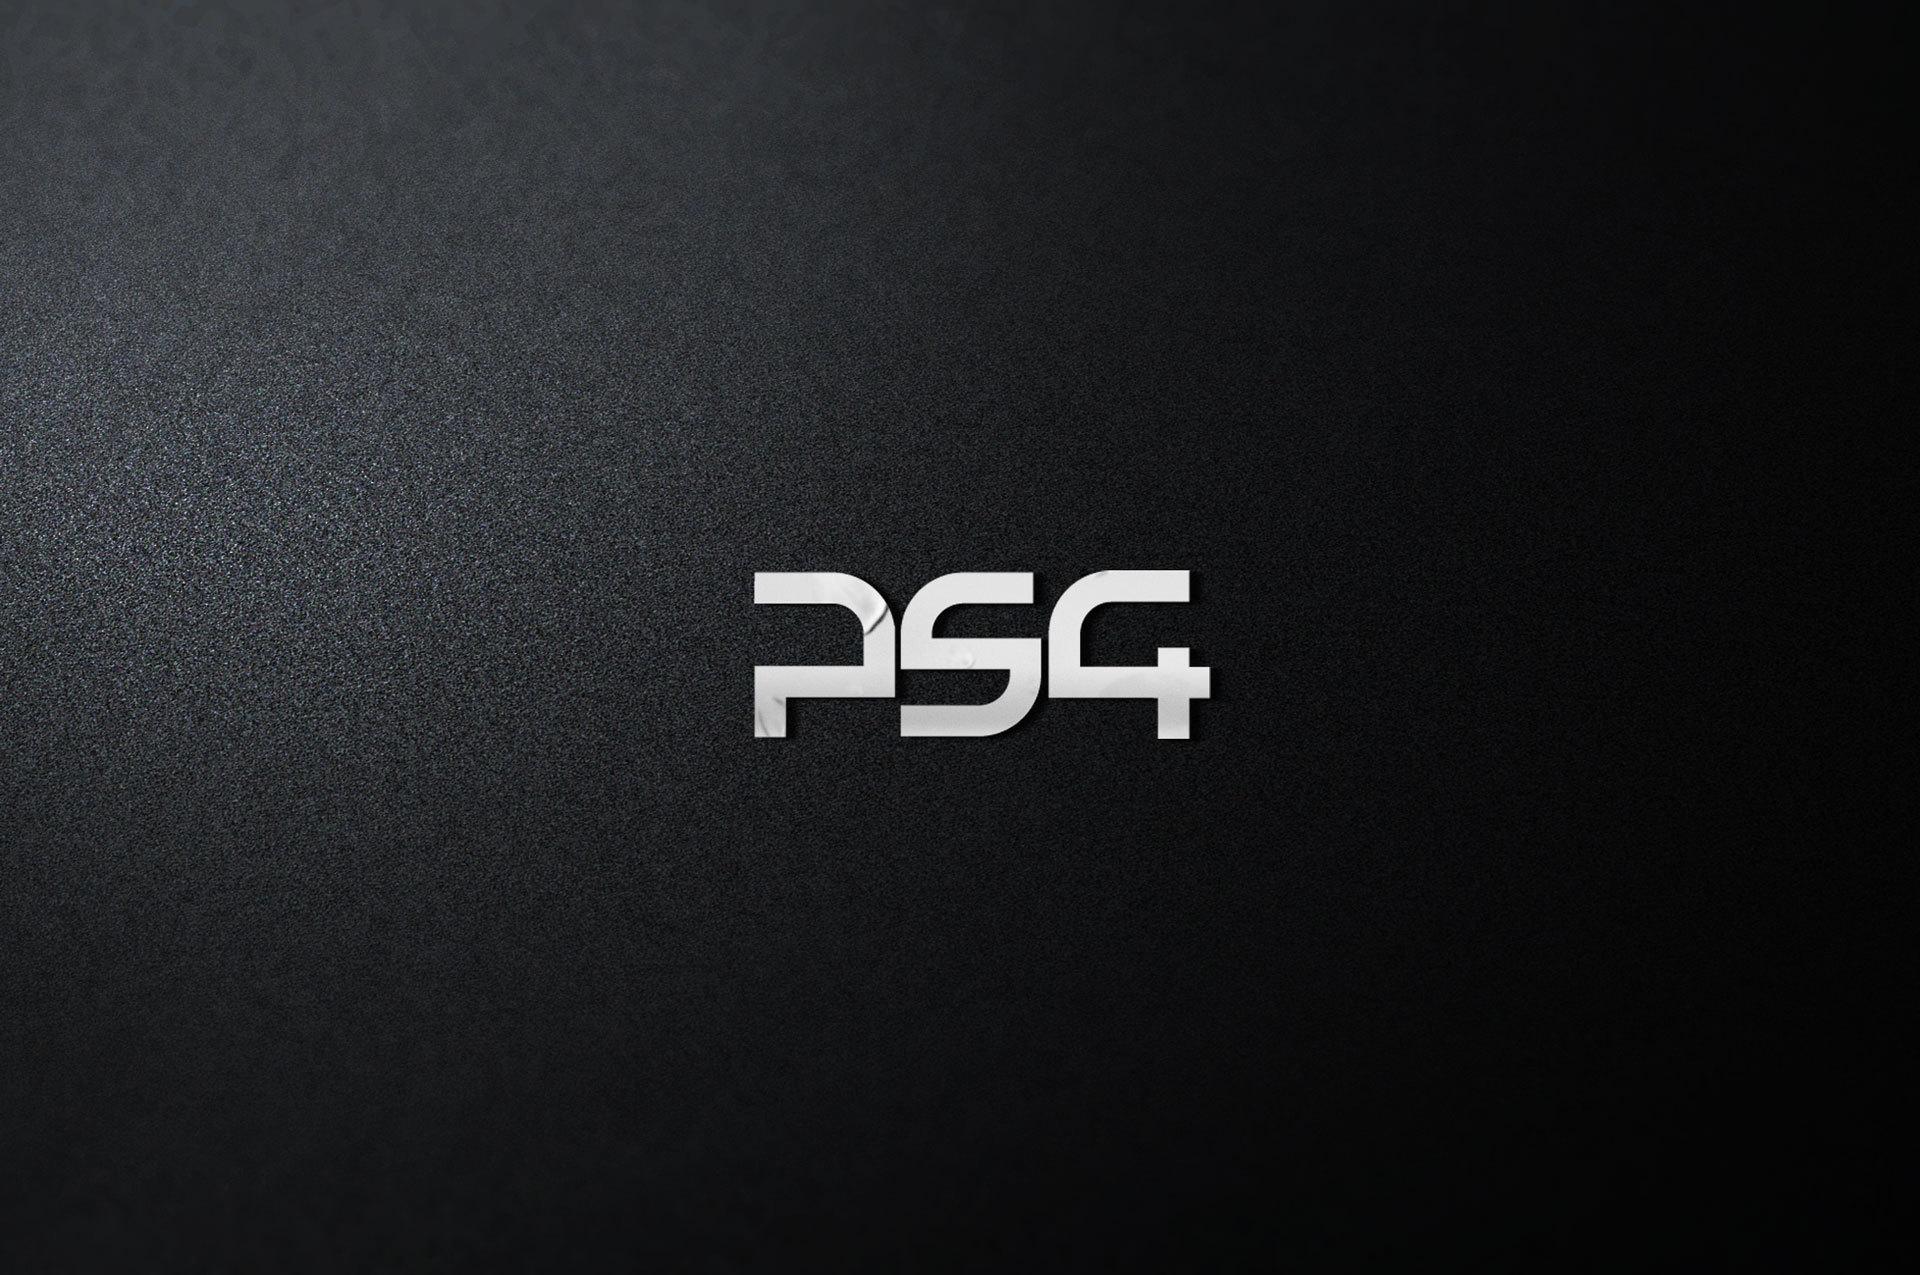 PS4 Minimal logo wallpaper and image, picture, photo